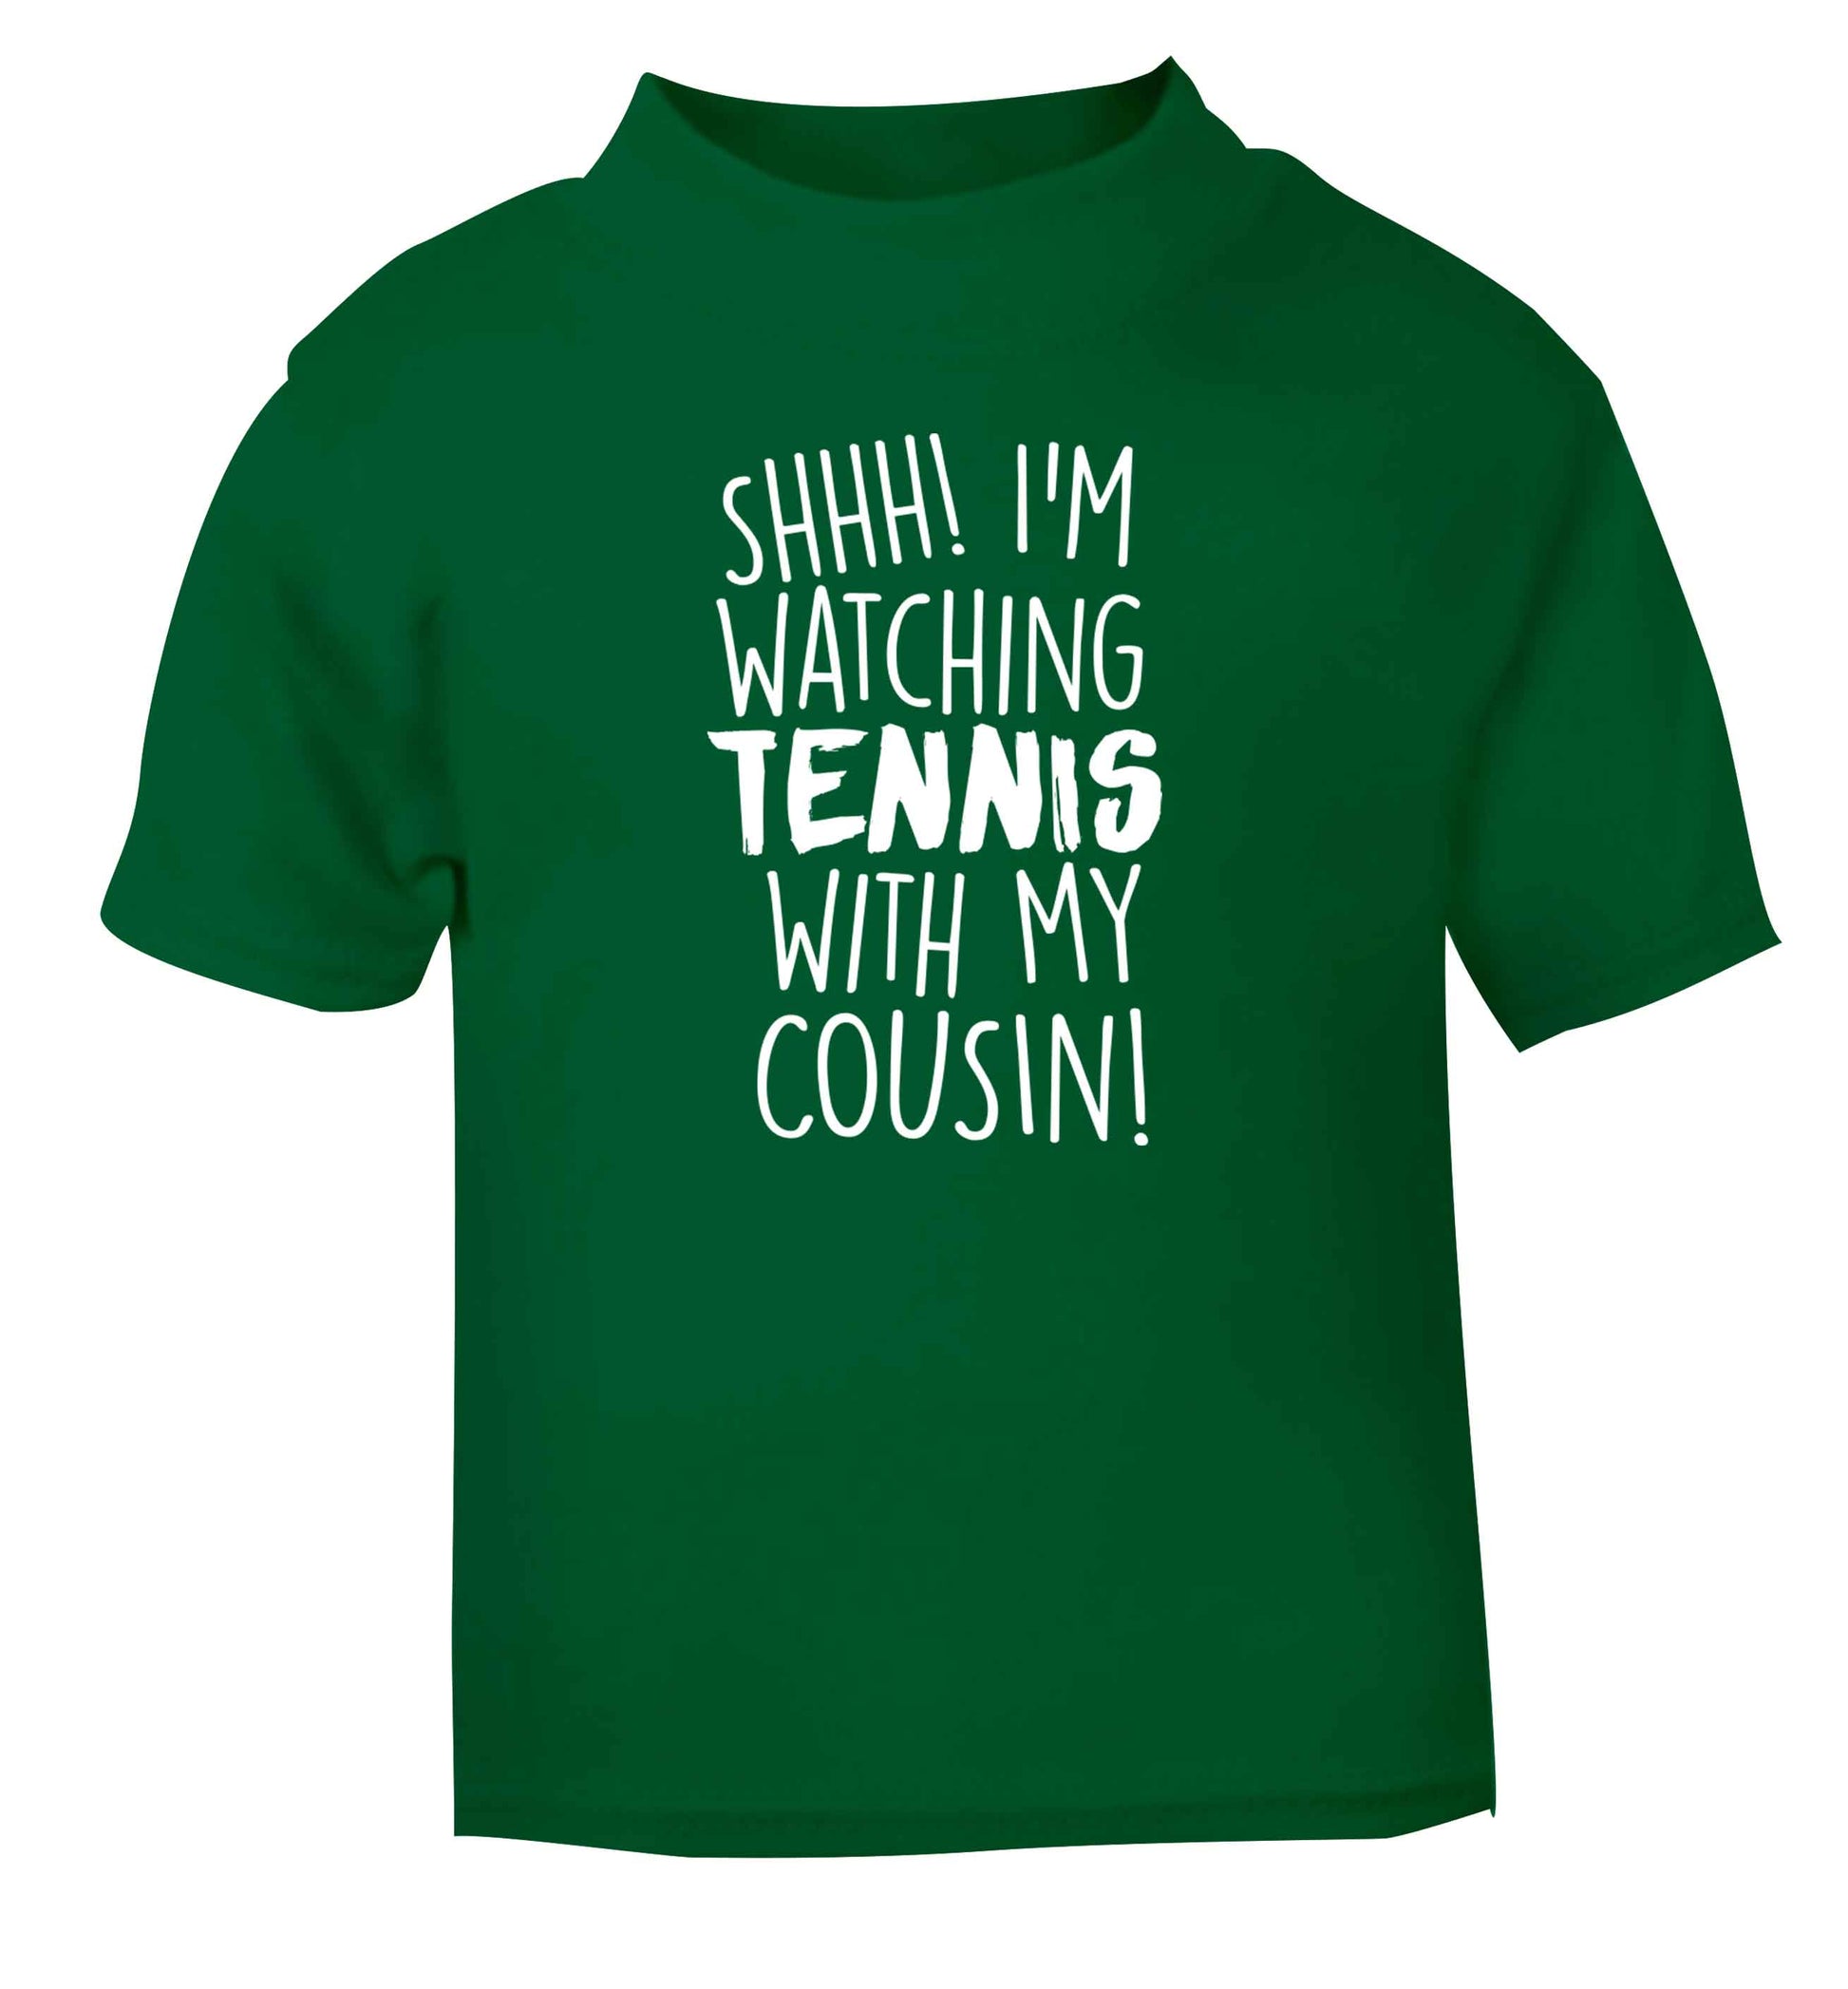 Shh! I'm watching tennis with my cousin! green Baby Toddler Tshirt 2 Years